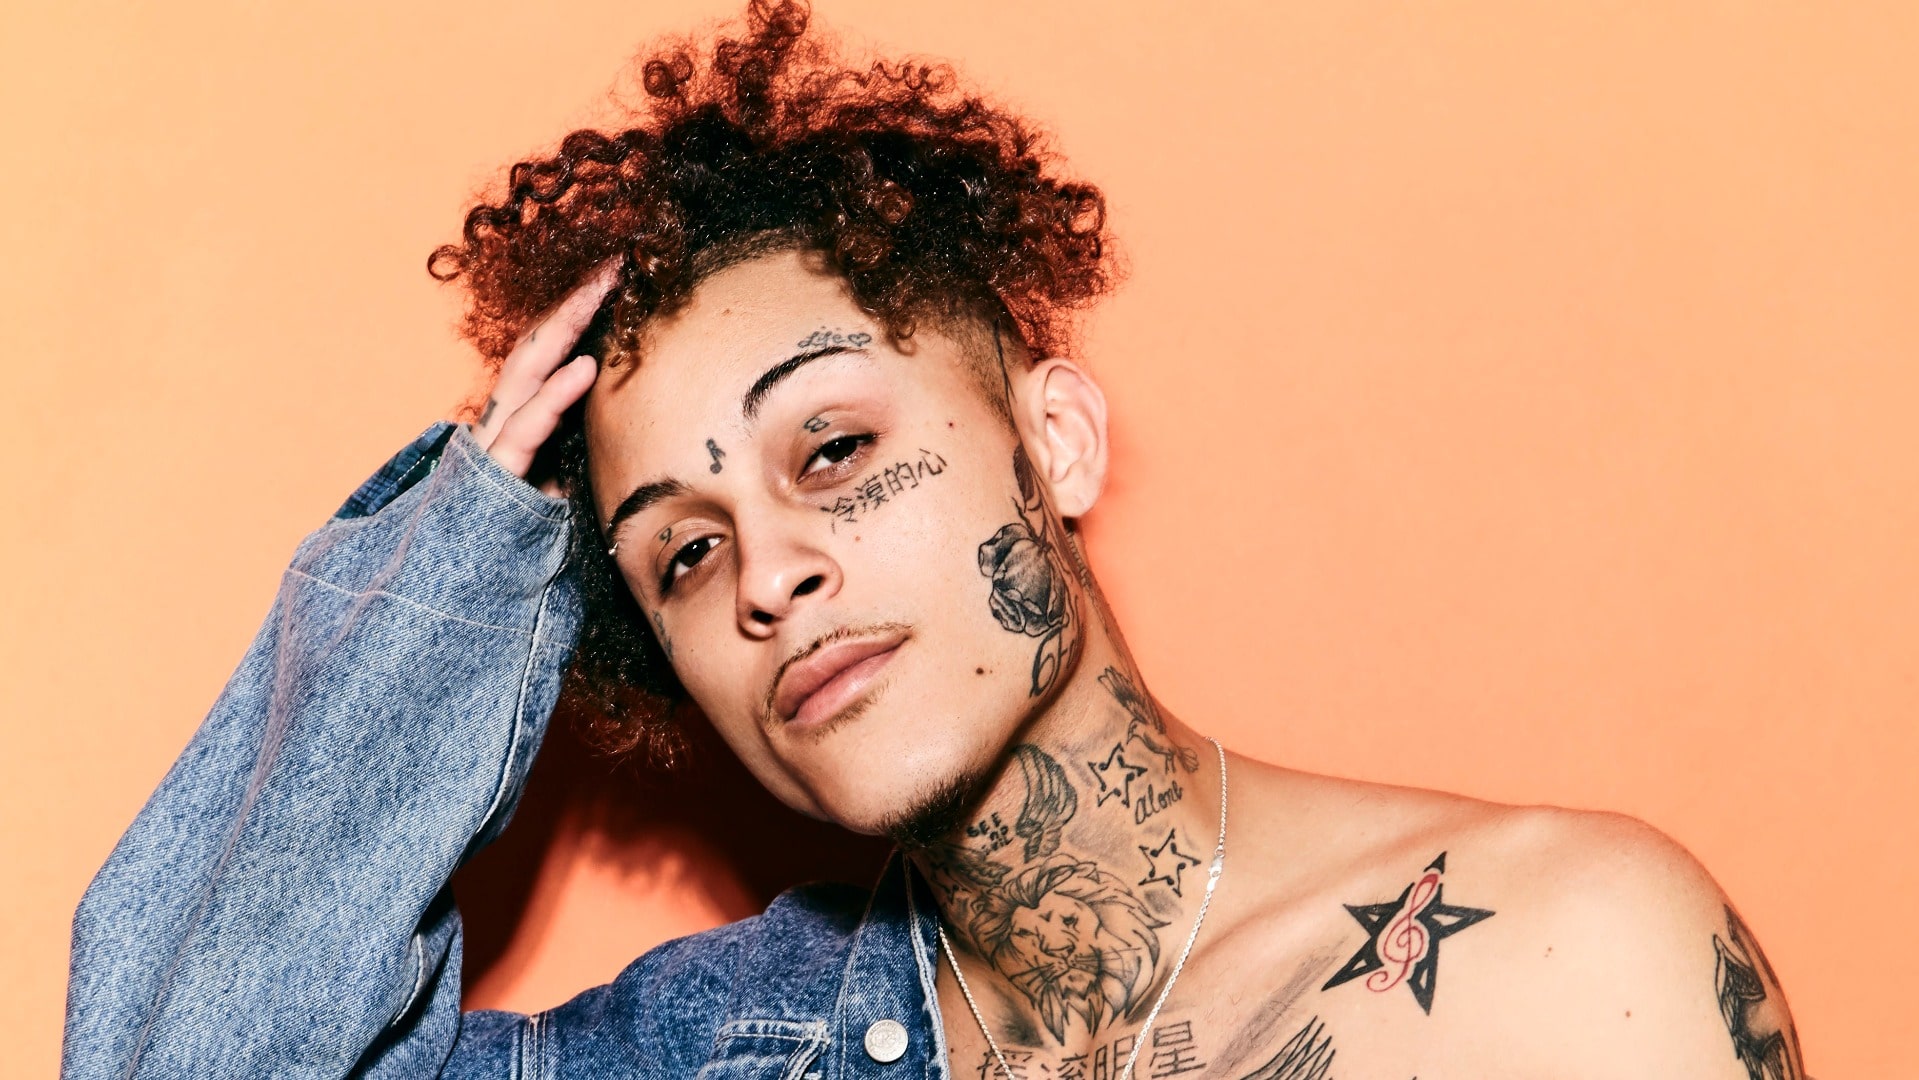 Lil Skies drops surprise debut album 'Shelby' / News / Warner Music New